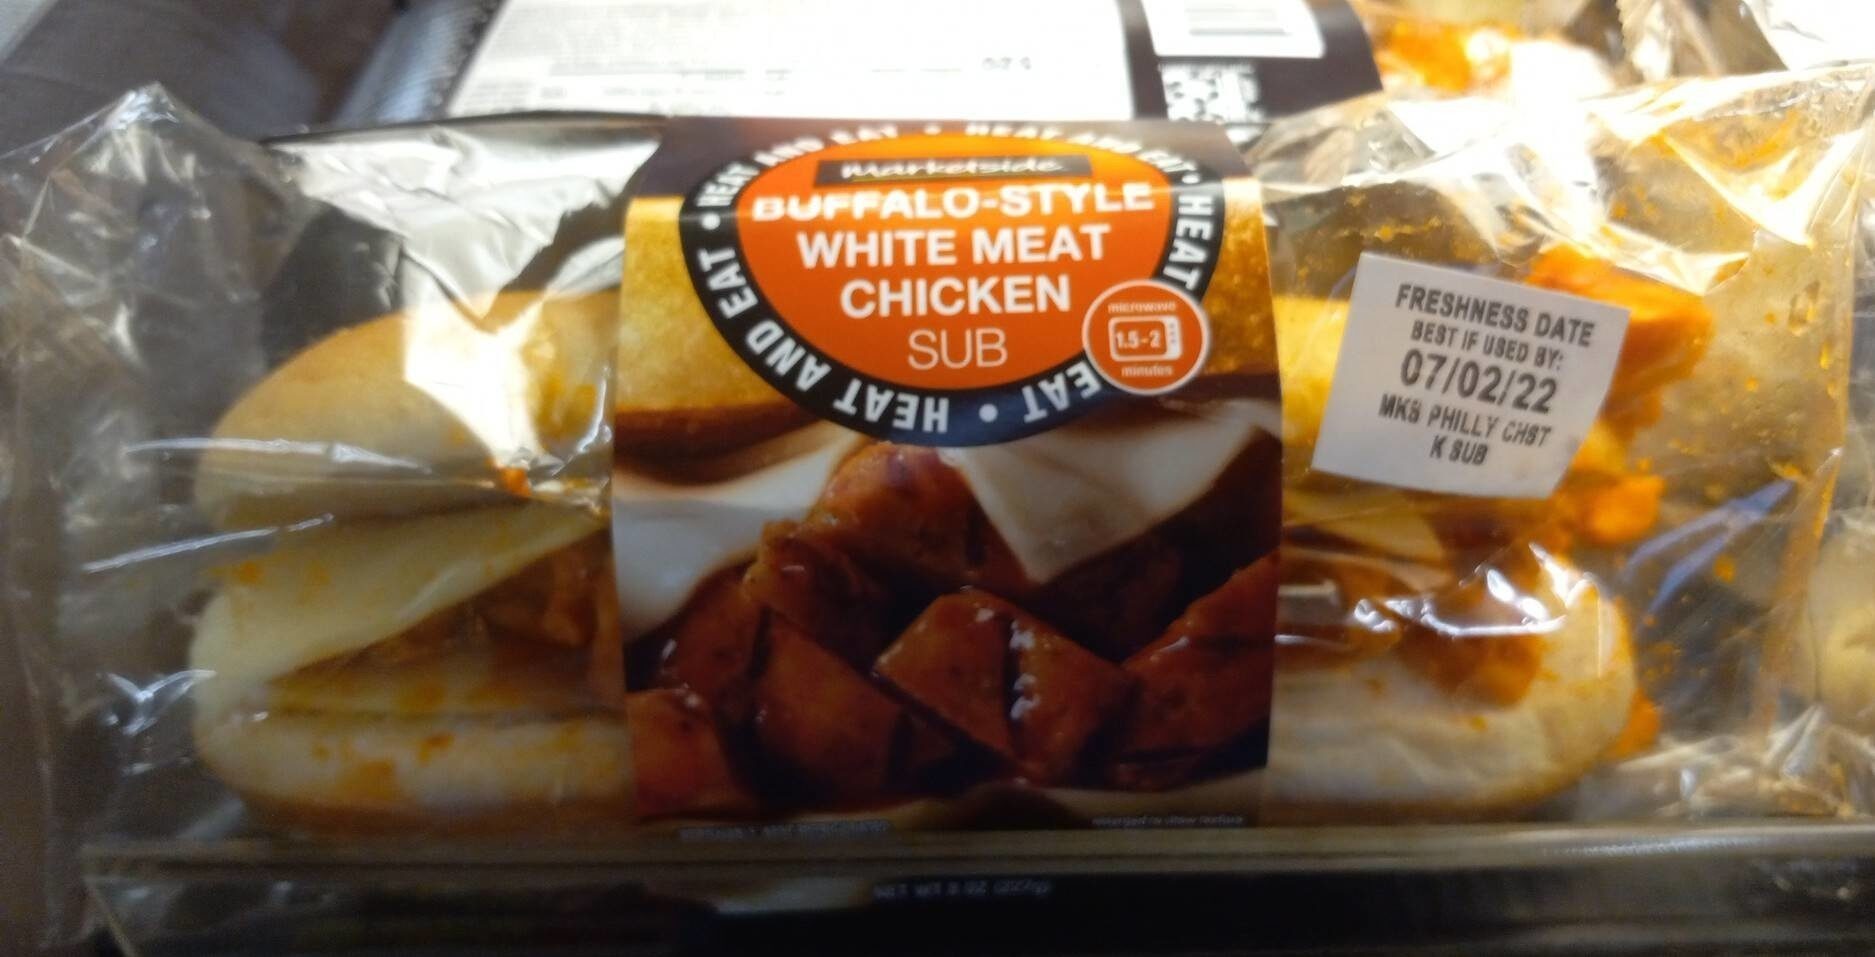 Buffalo-Style White Meat Chicken Sub - Product